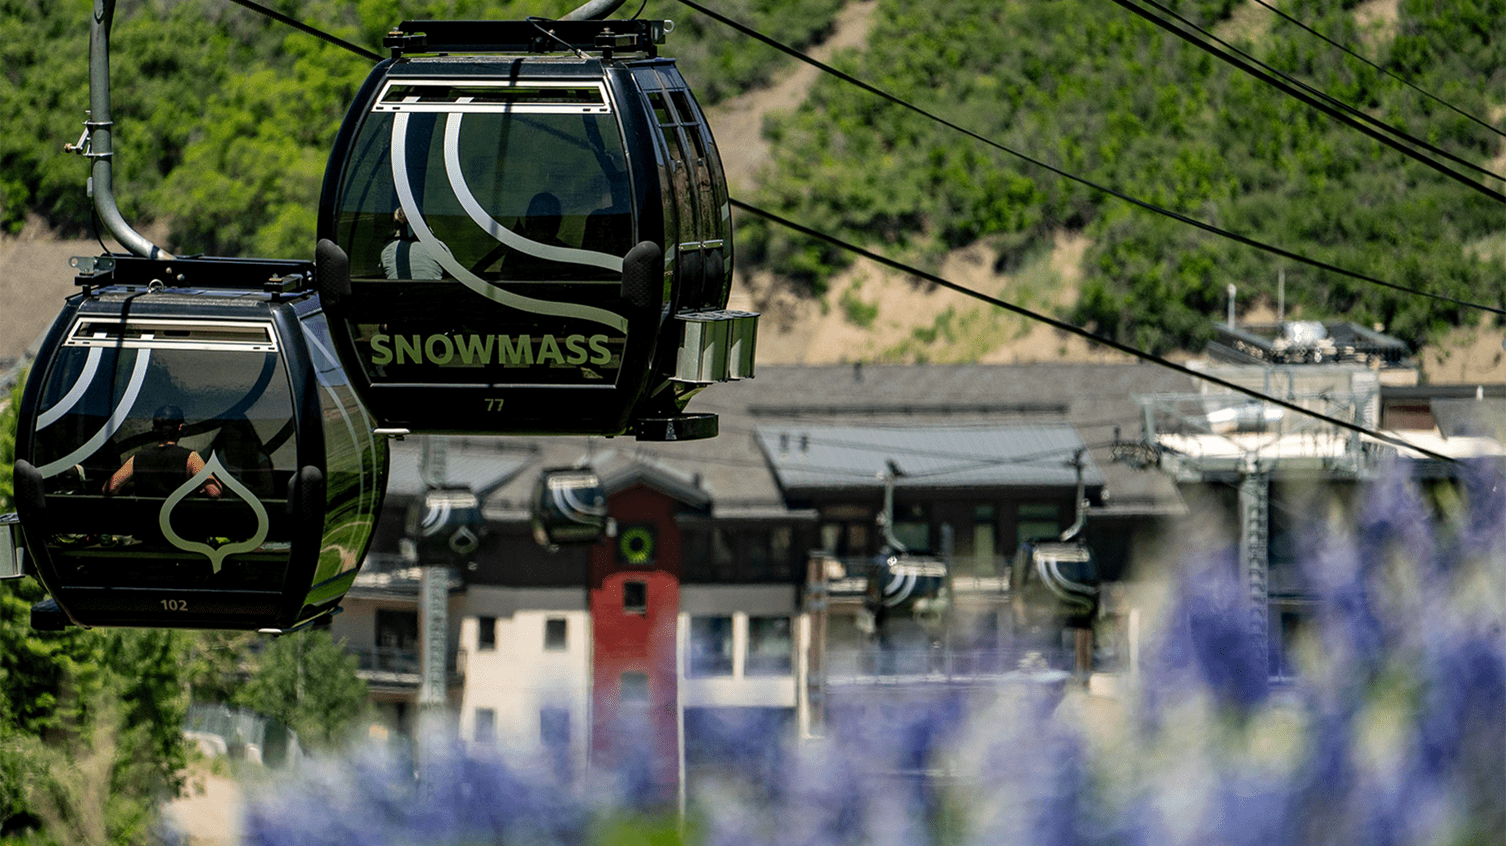 Gondola on Snowmass in front of the Limelight Snowmass Hotel, in the summer, with purple flowers